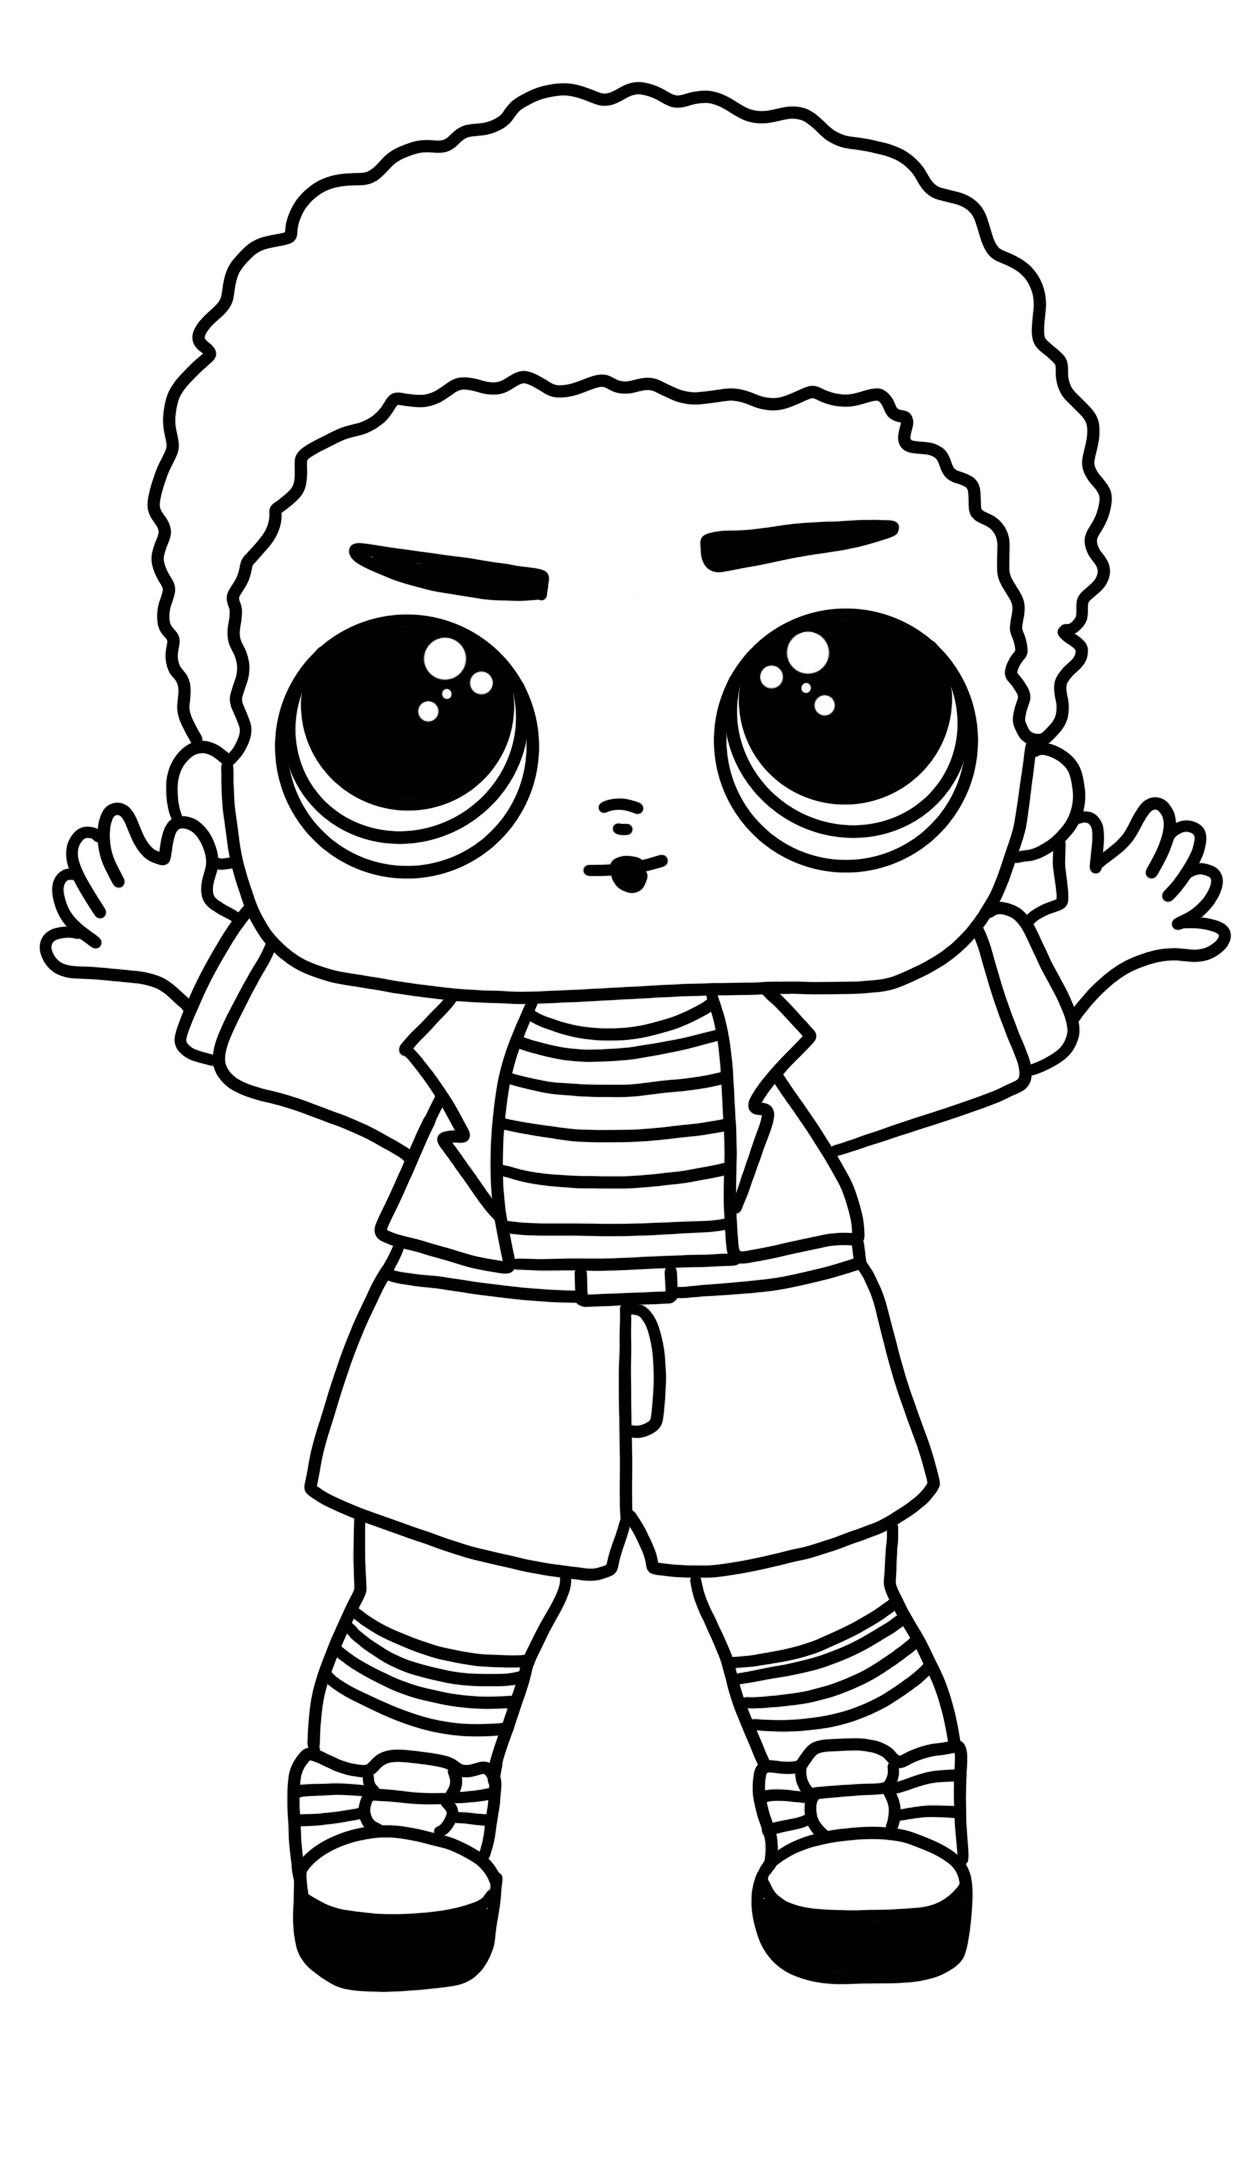 coloring pages : Colouring Pictures Lol Dolls Awesome Punk Boy Lol Coloring  Page Colouring Pictures Lol Dolls ~ affiliateprogrambook.com